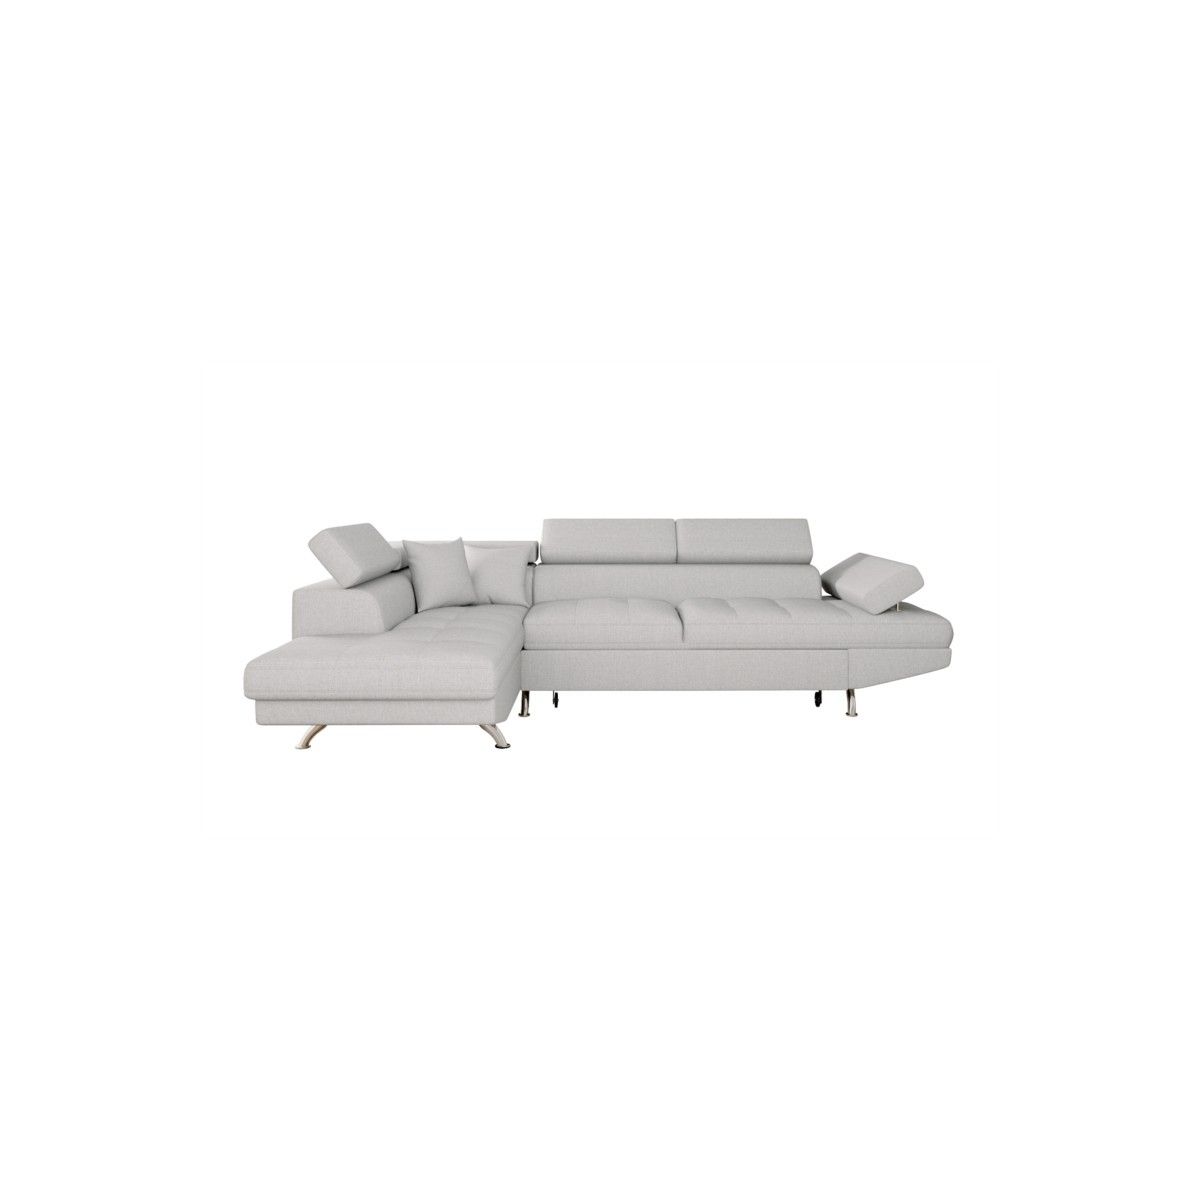 Convertible Corner Sofa 5 Seats Fabric Left Corner Rio (pearl Grey) – Amp  Story 8749 Within 8 Seat Convertible Sofas (View 8 of 15)